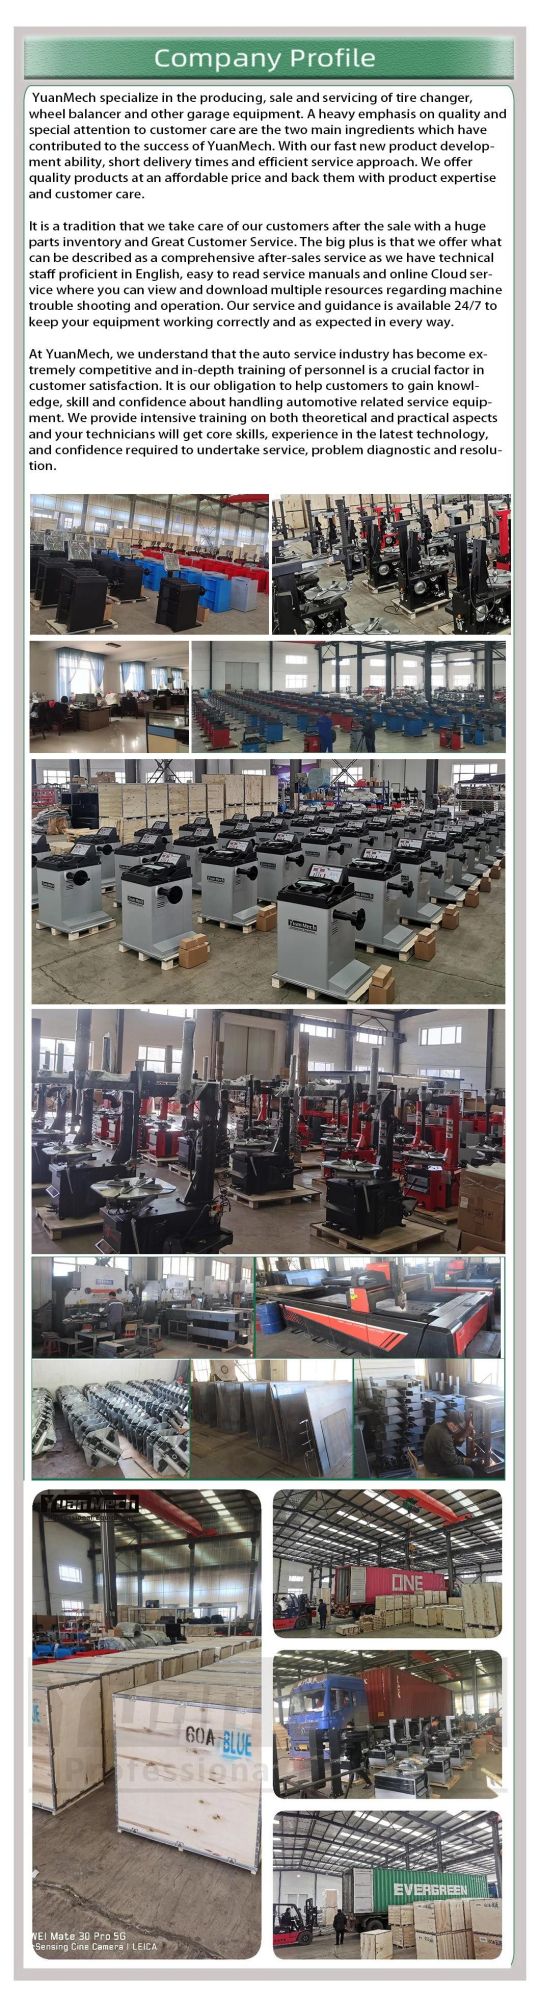 Good Quality 10-24 Inch Tire Changer Machine Price C9573 for Workshop